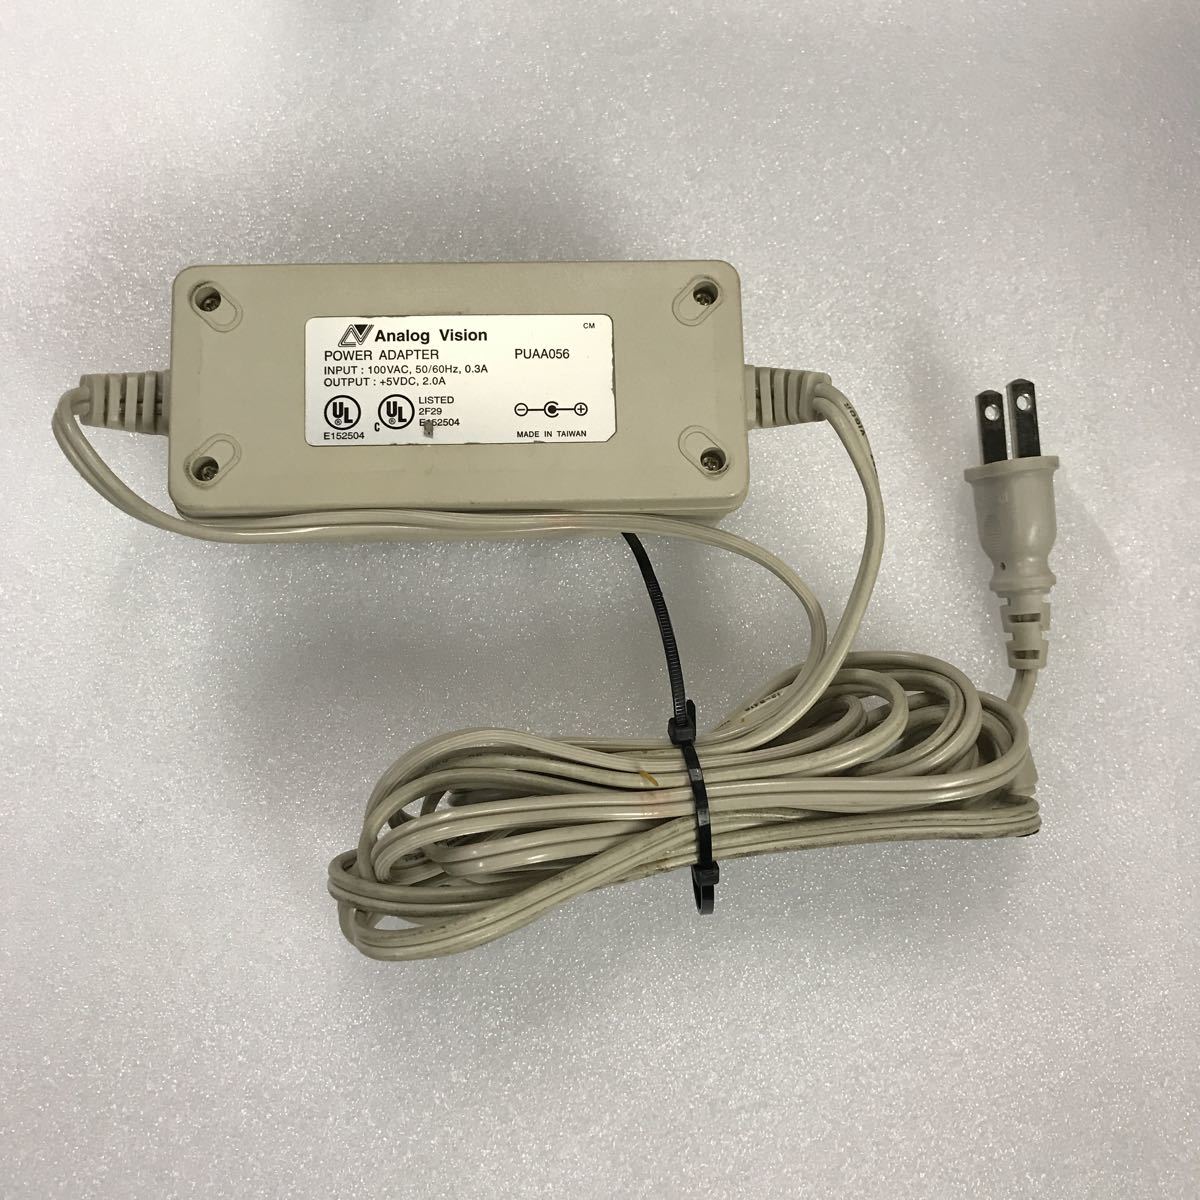 WM1134 Analog Vision POWER ADAPTER PUAA056 +5DC 2.0A 100VAC 50/60Hz0.3A free shipping 0108